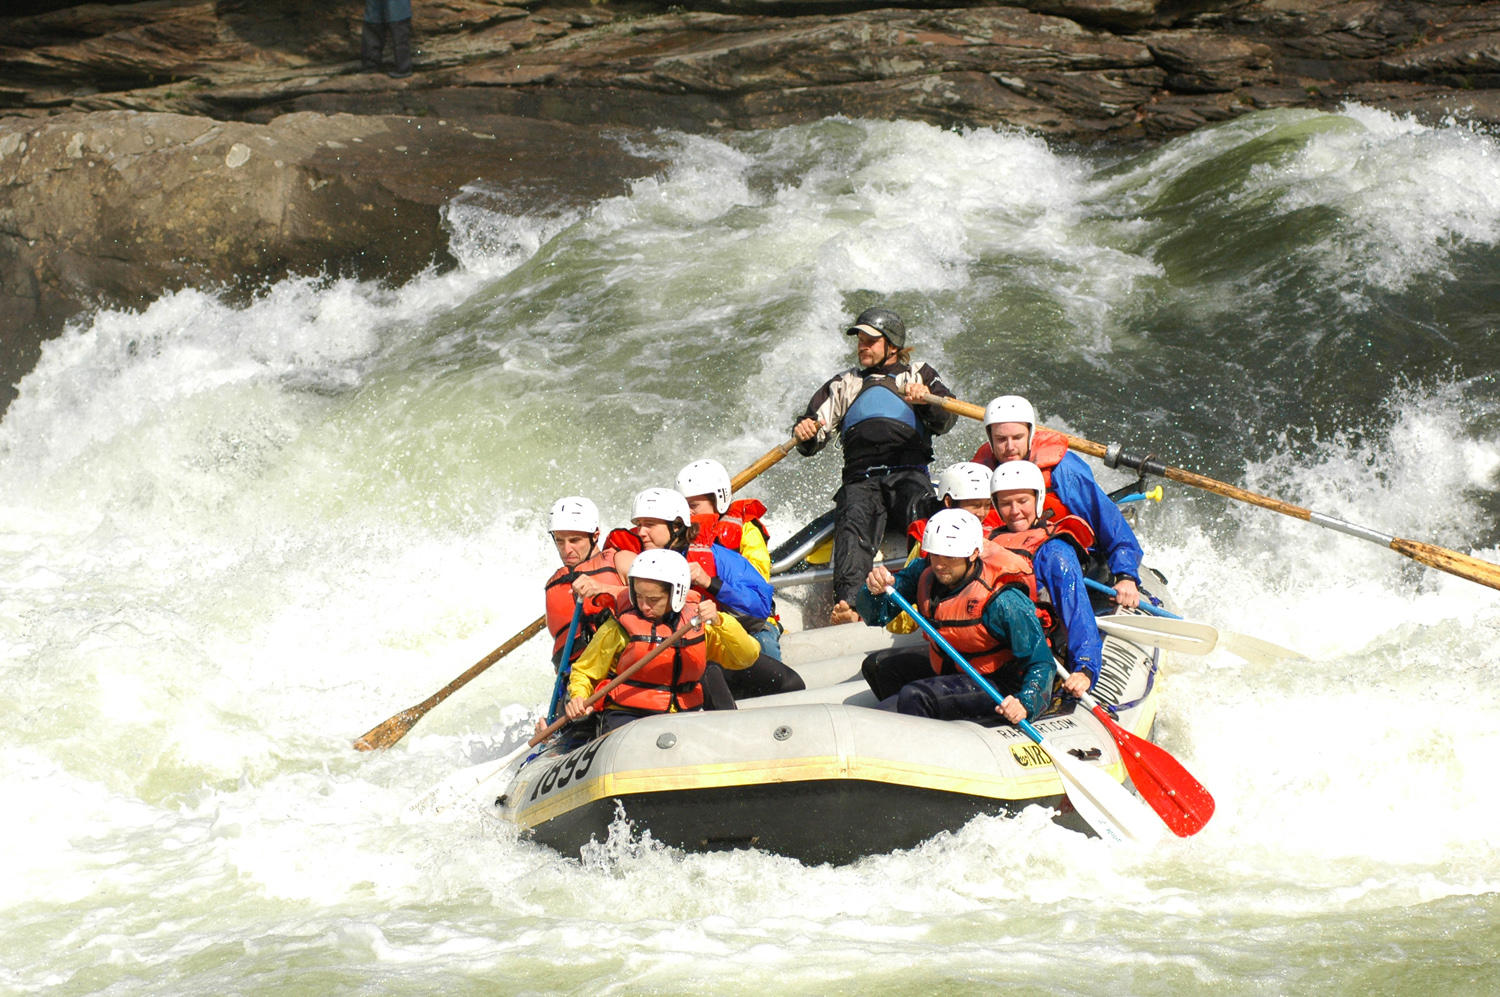 Guiding through a rapid on the Gauley River